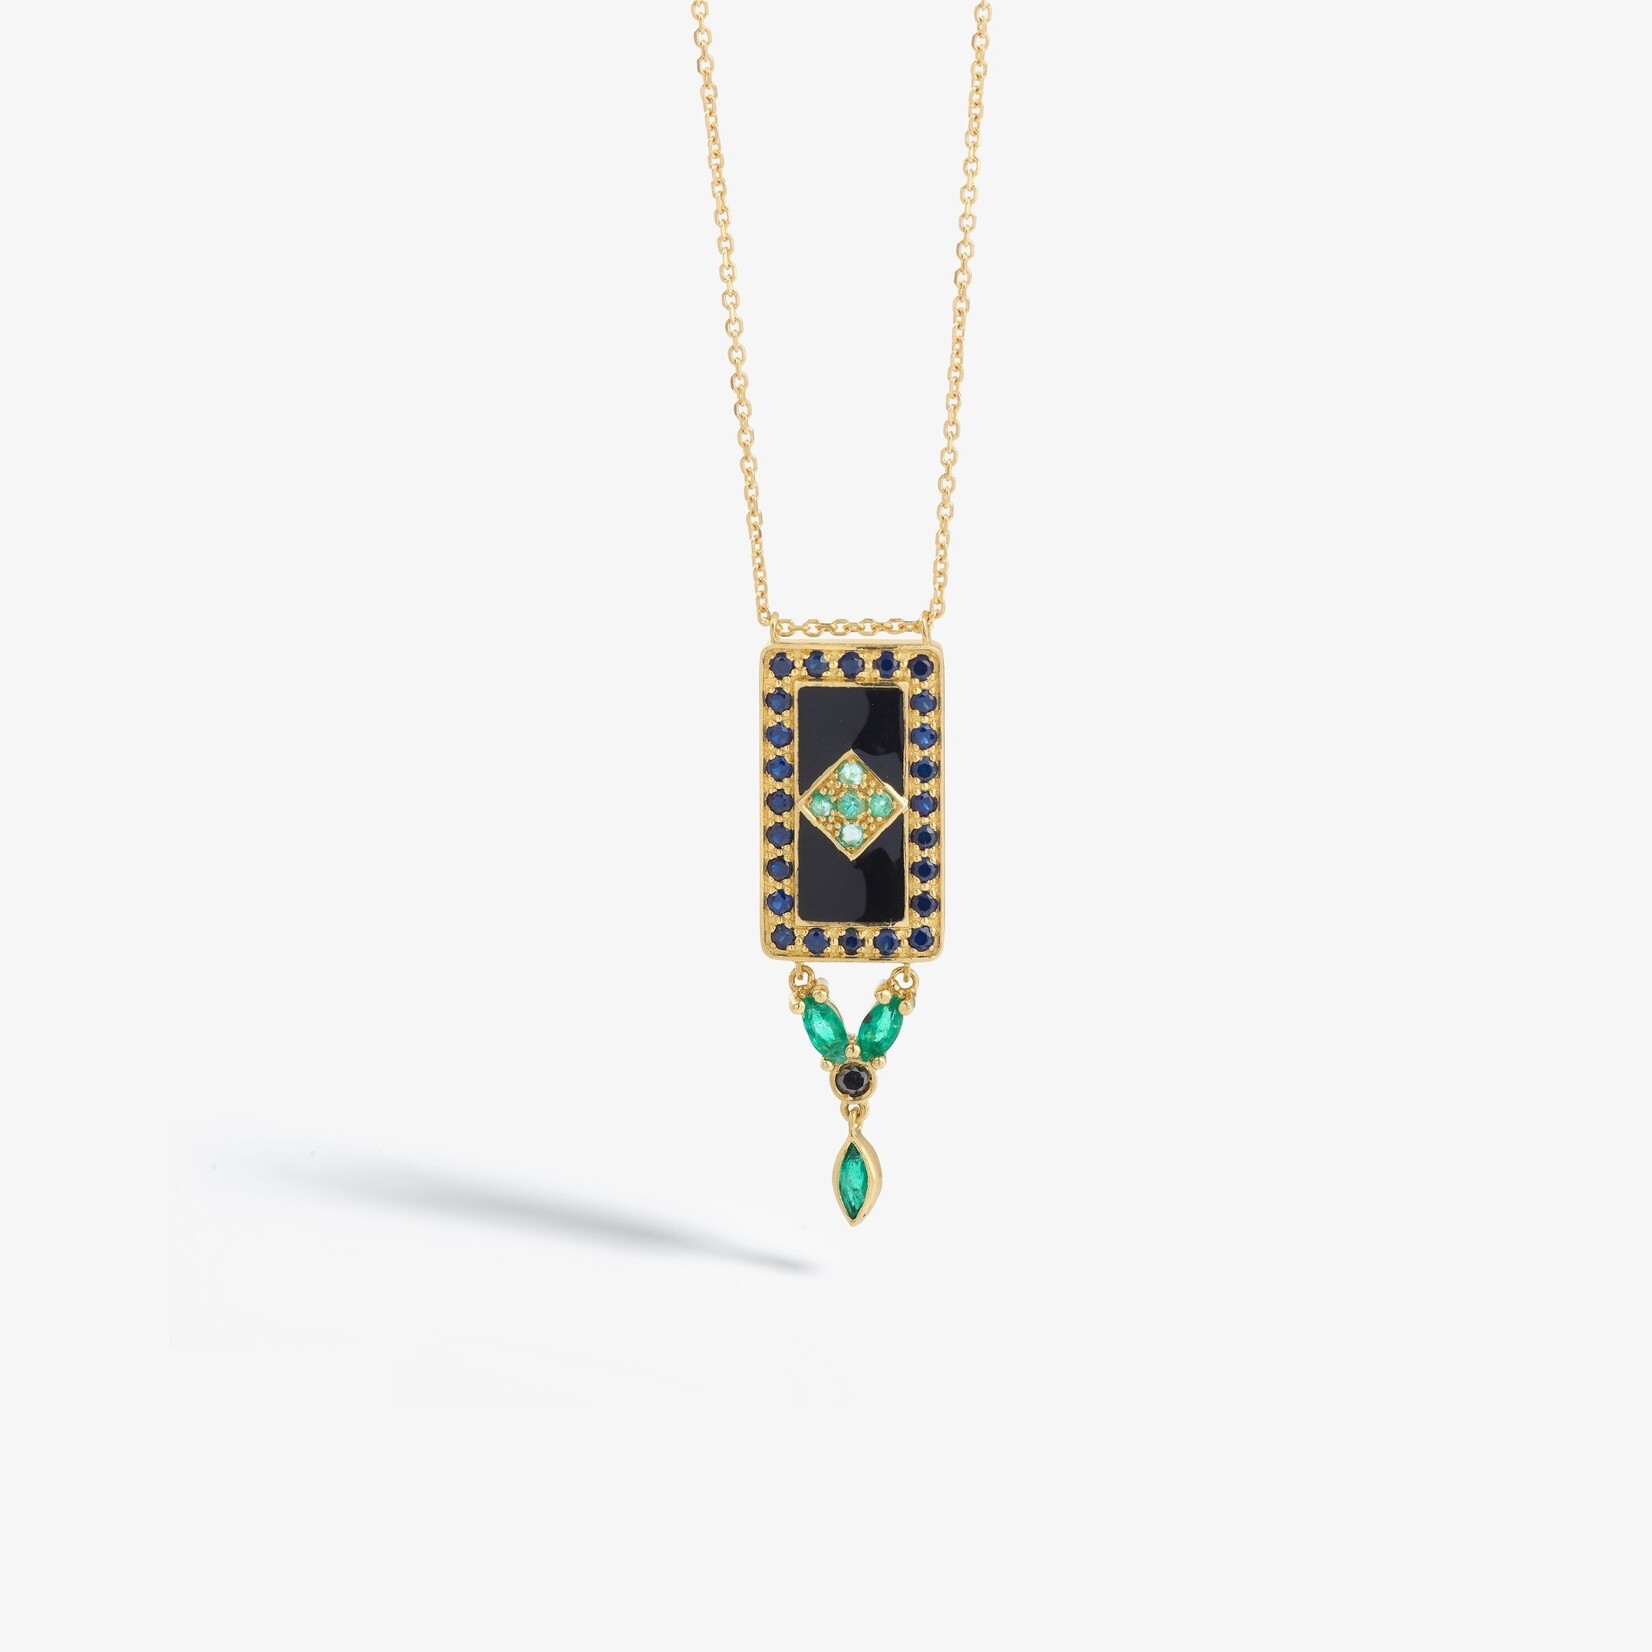 Sophie d'Agon Ava Necklace 2 Green